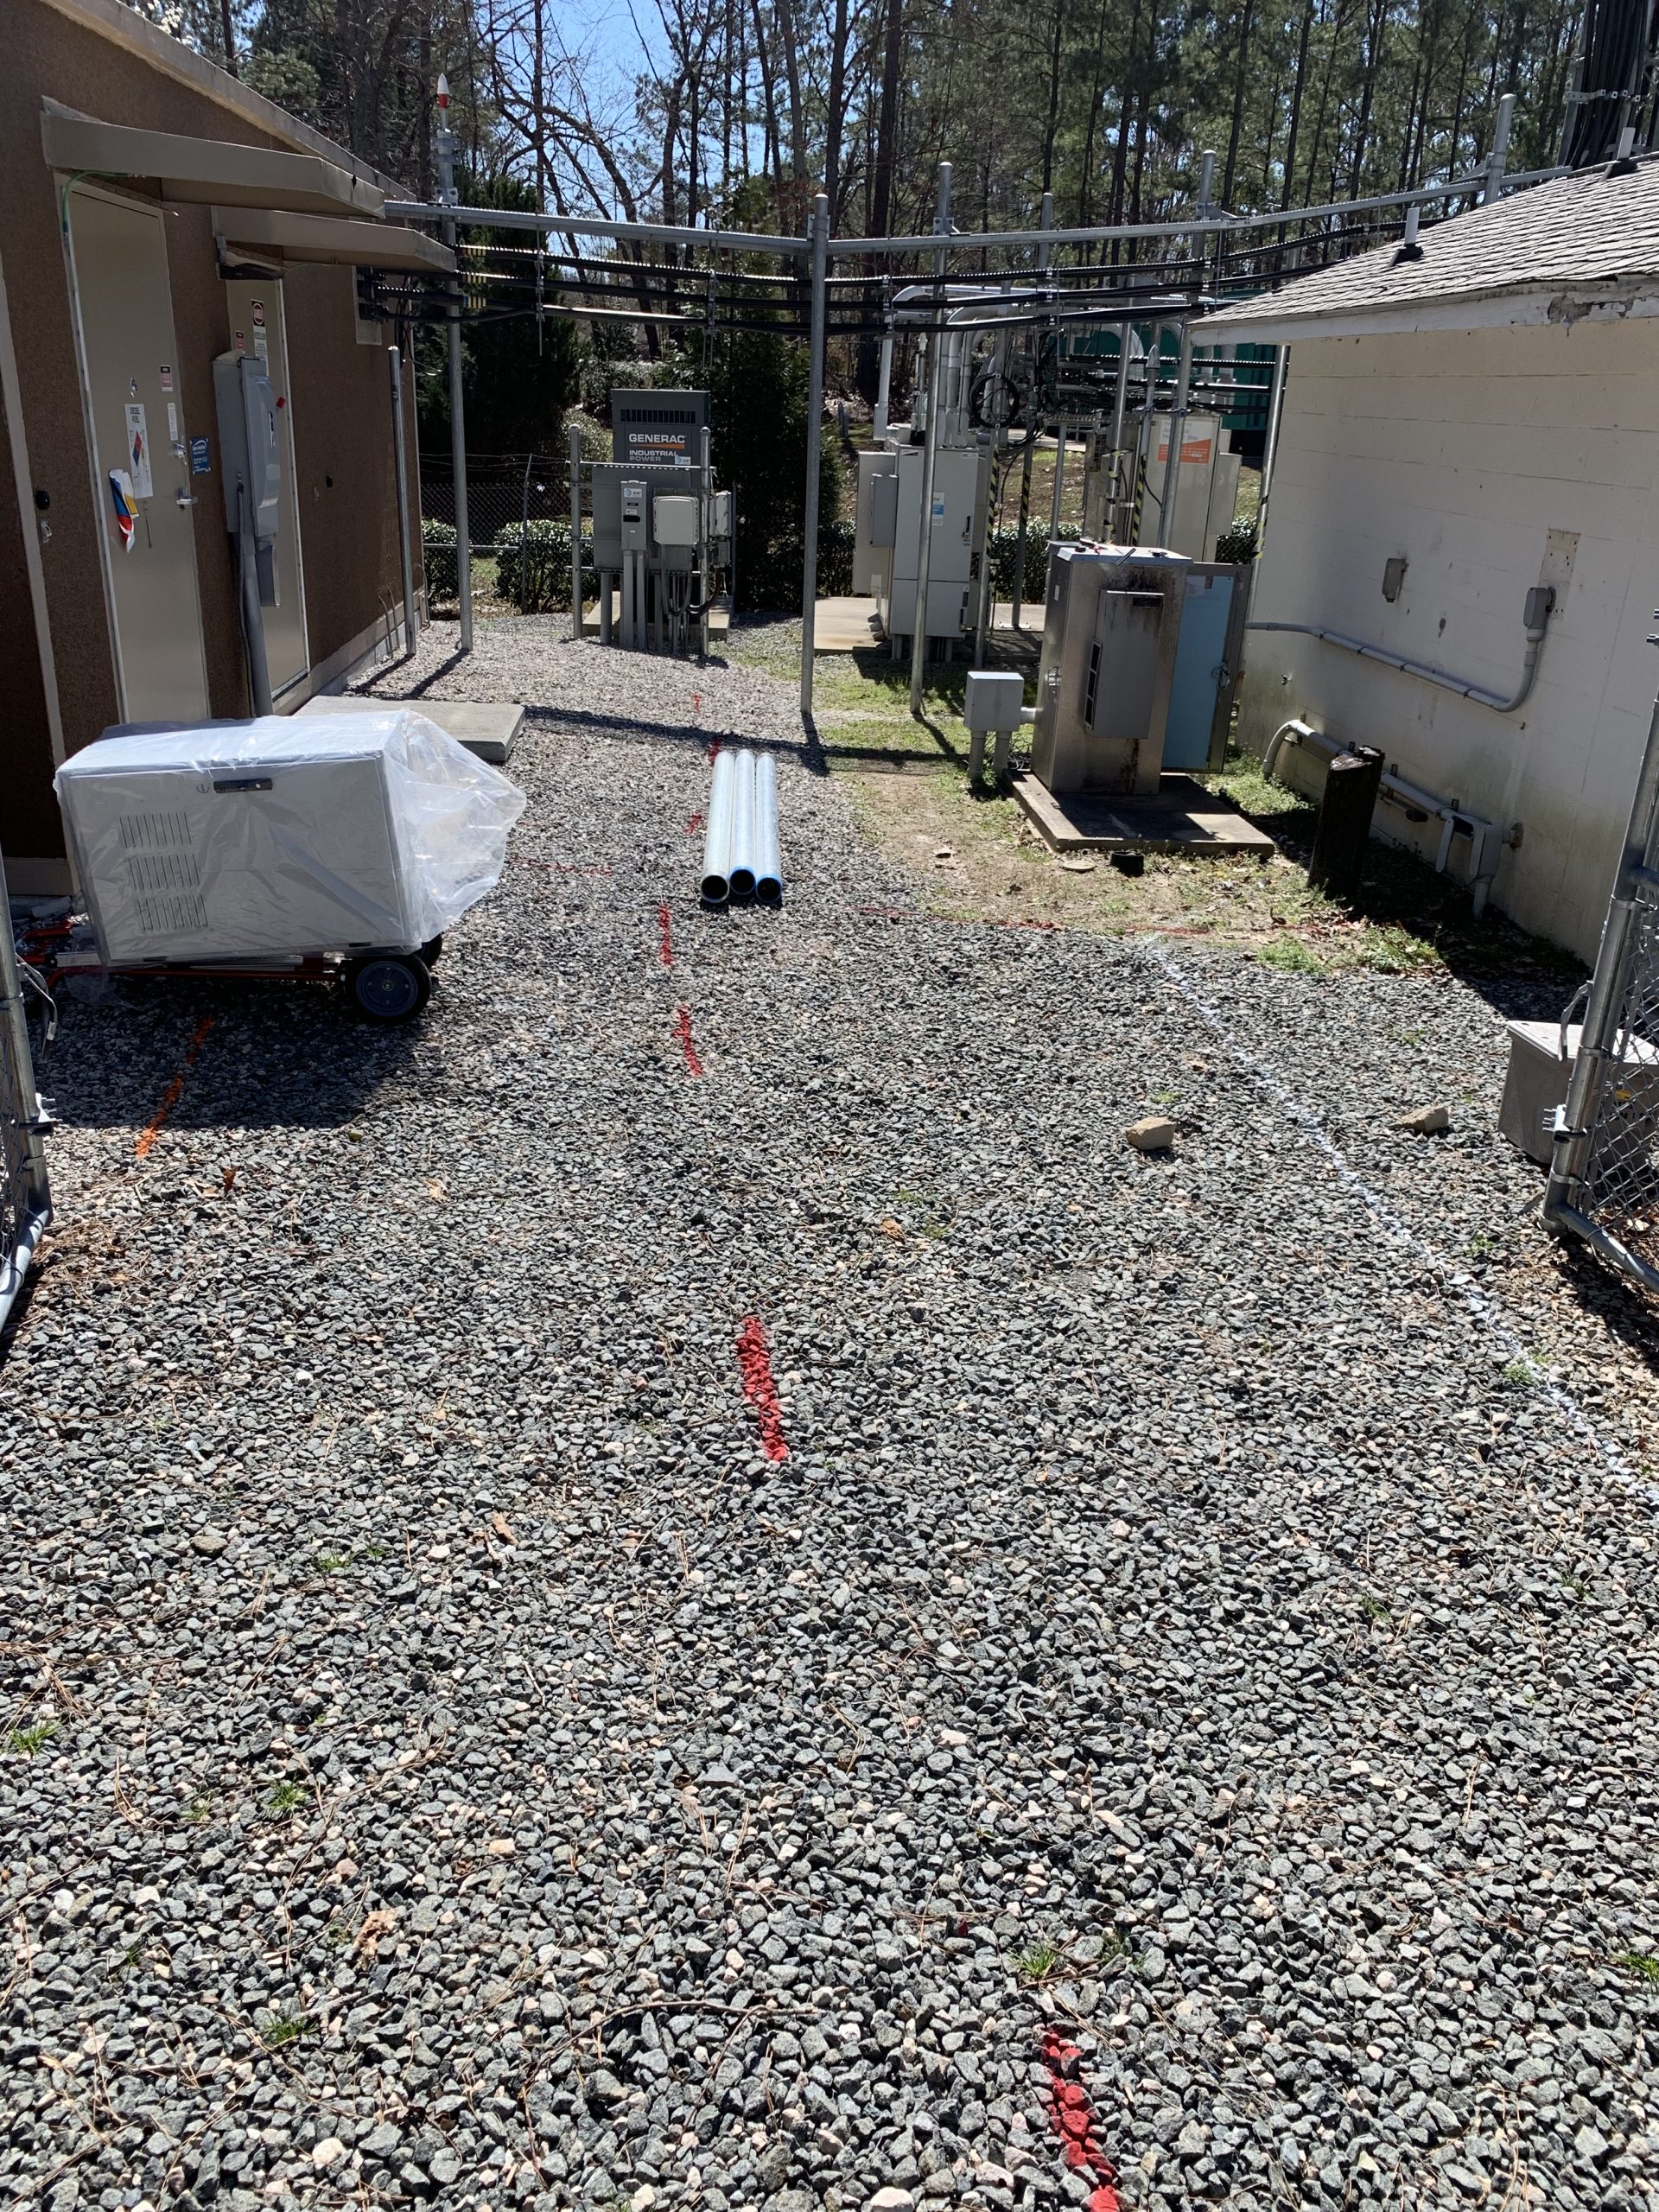 PROJECTS RF USA.  Image 5. Demarcated route for the installation of Optic Fiber (03/06/2019)